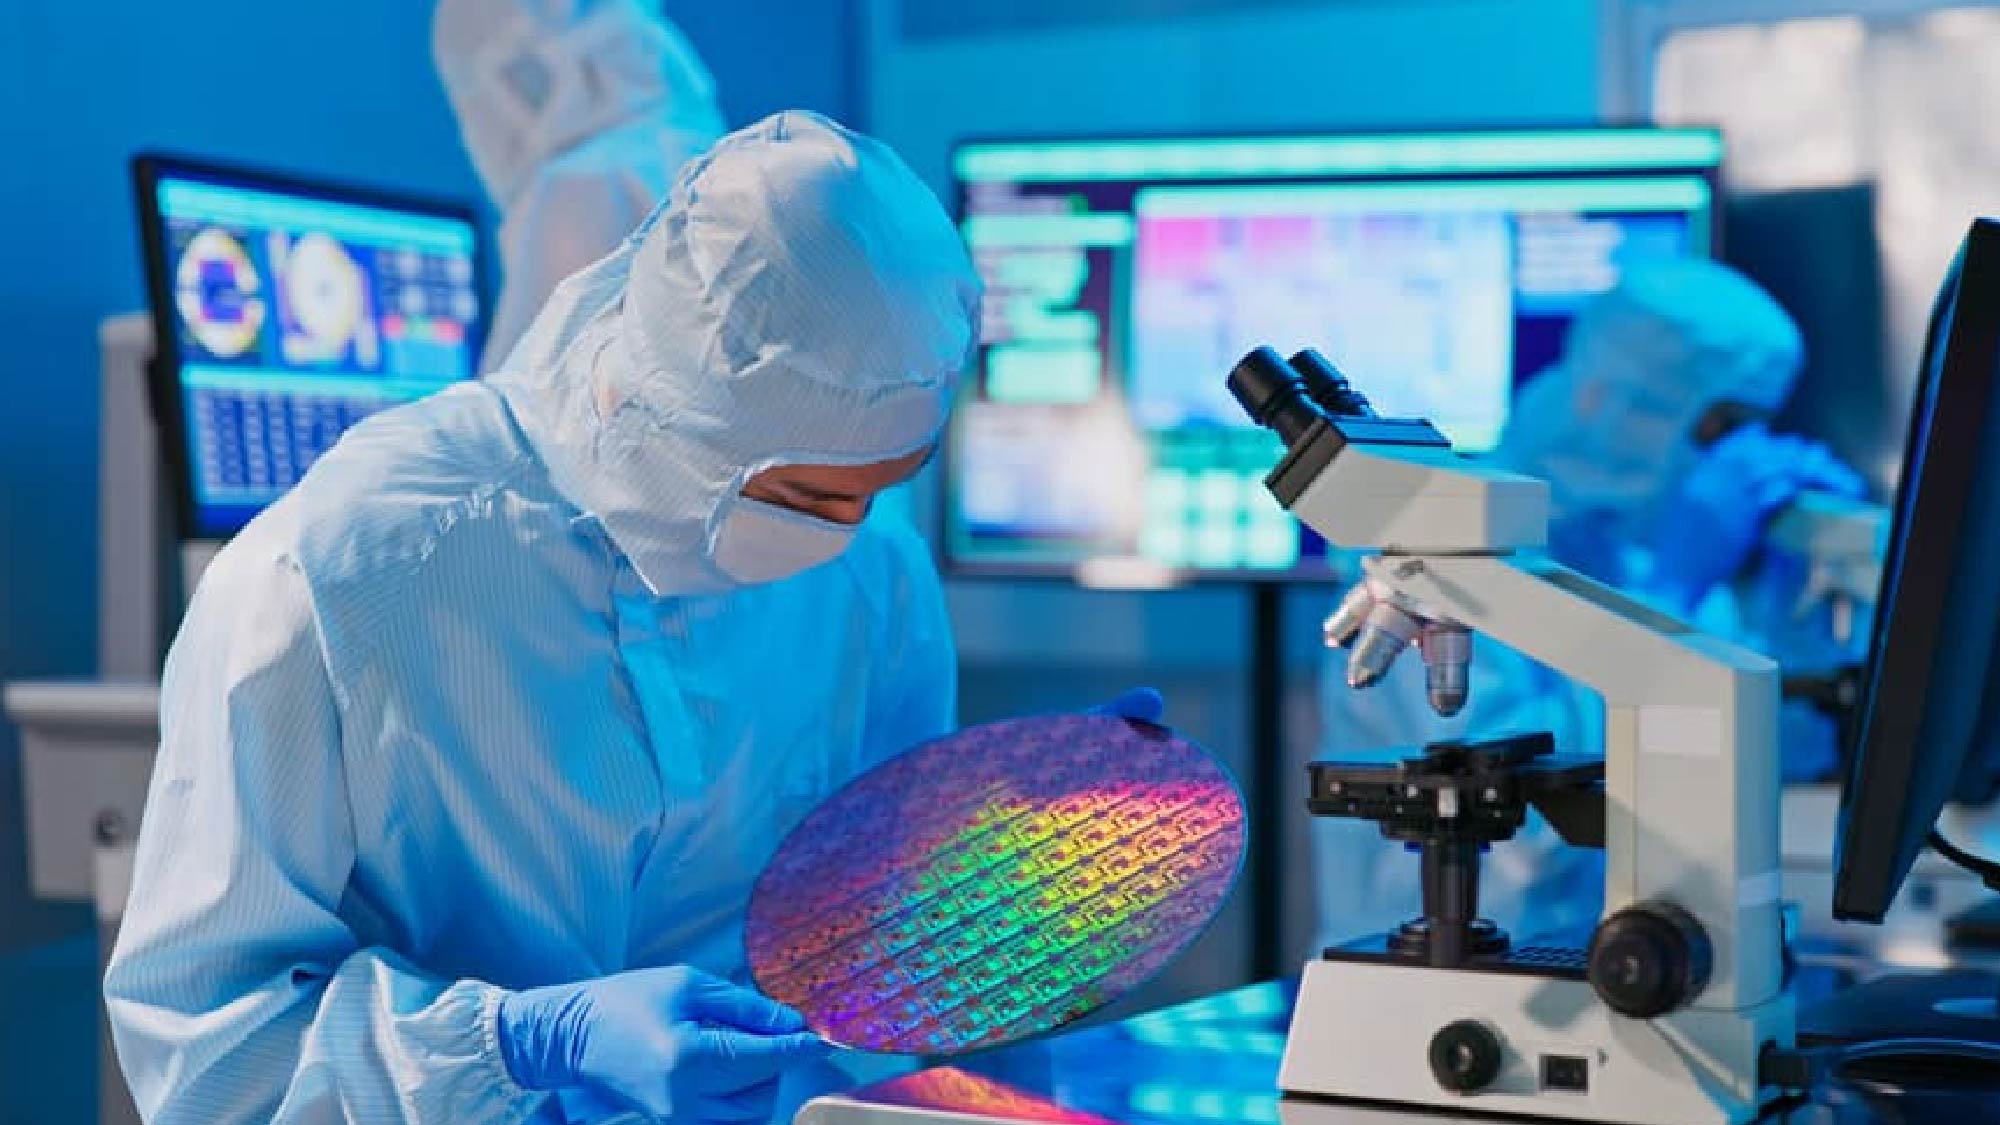 Semiconductor Clean Room Design Requirements 101 | Air Innovations